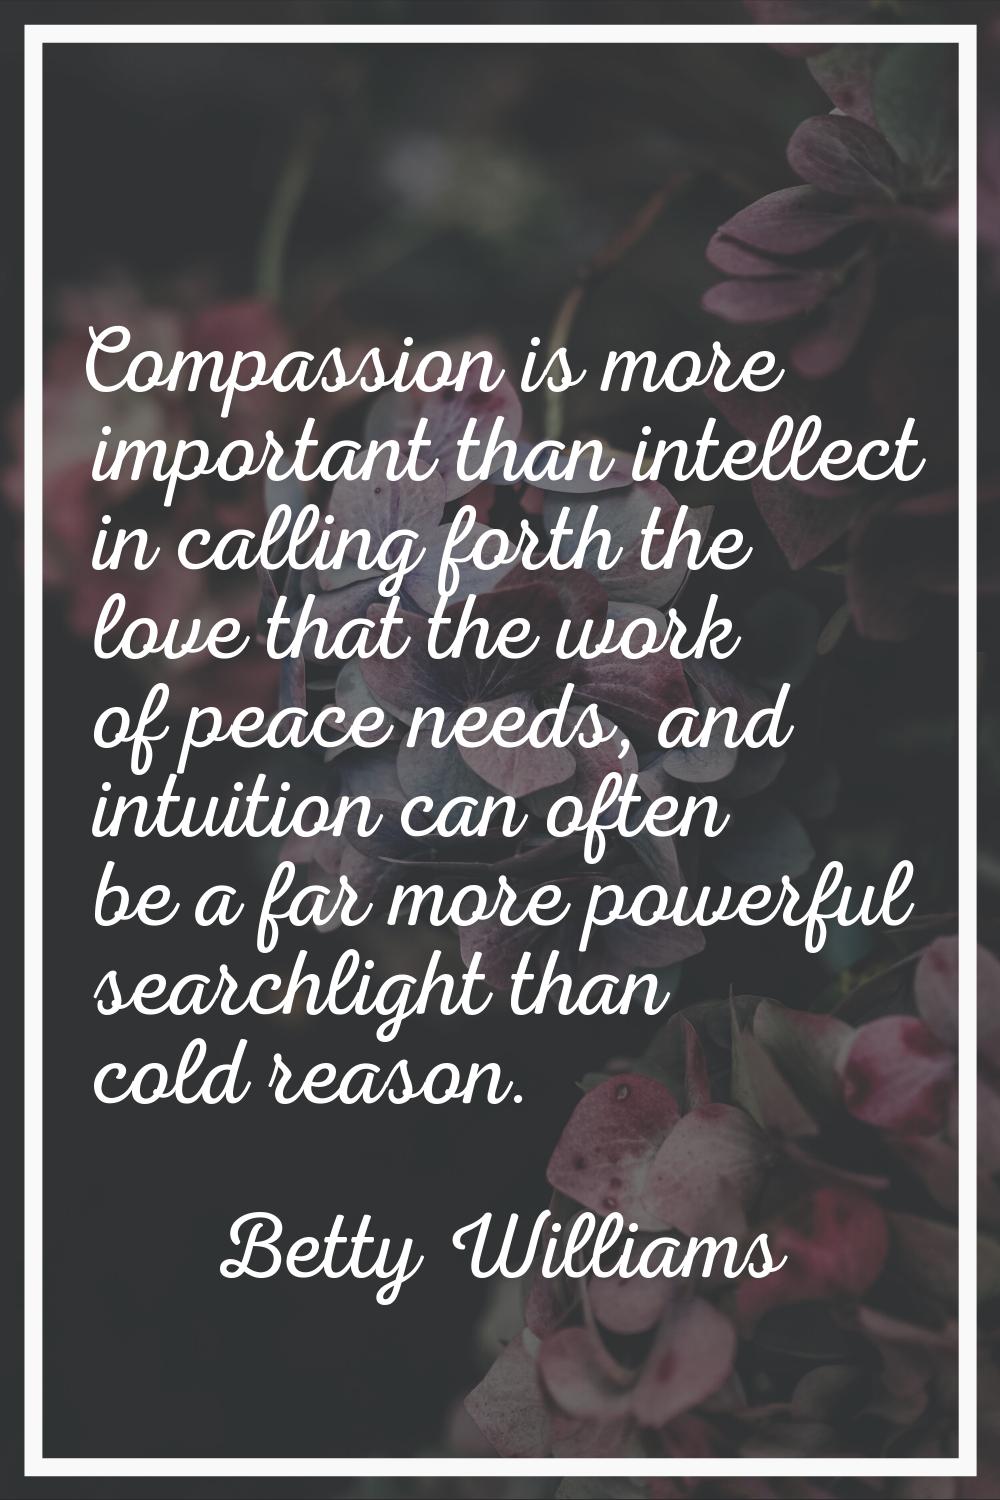 Compassion is more important than intellect in calling forth the love that the work of peace needs,